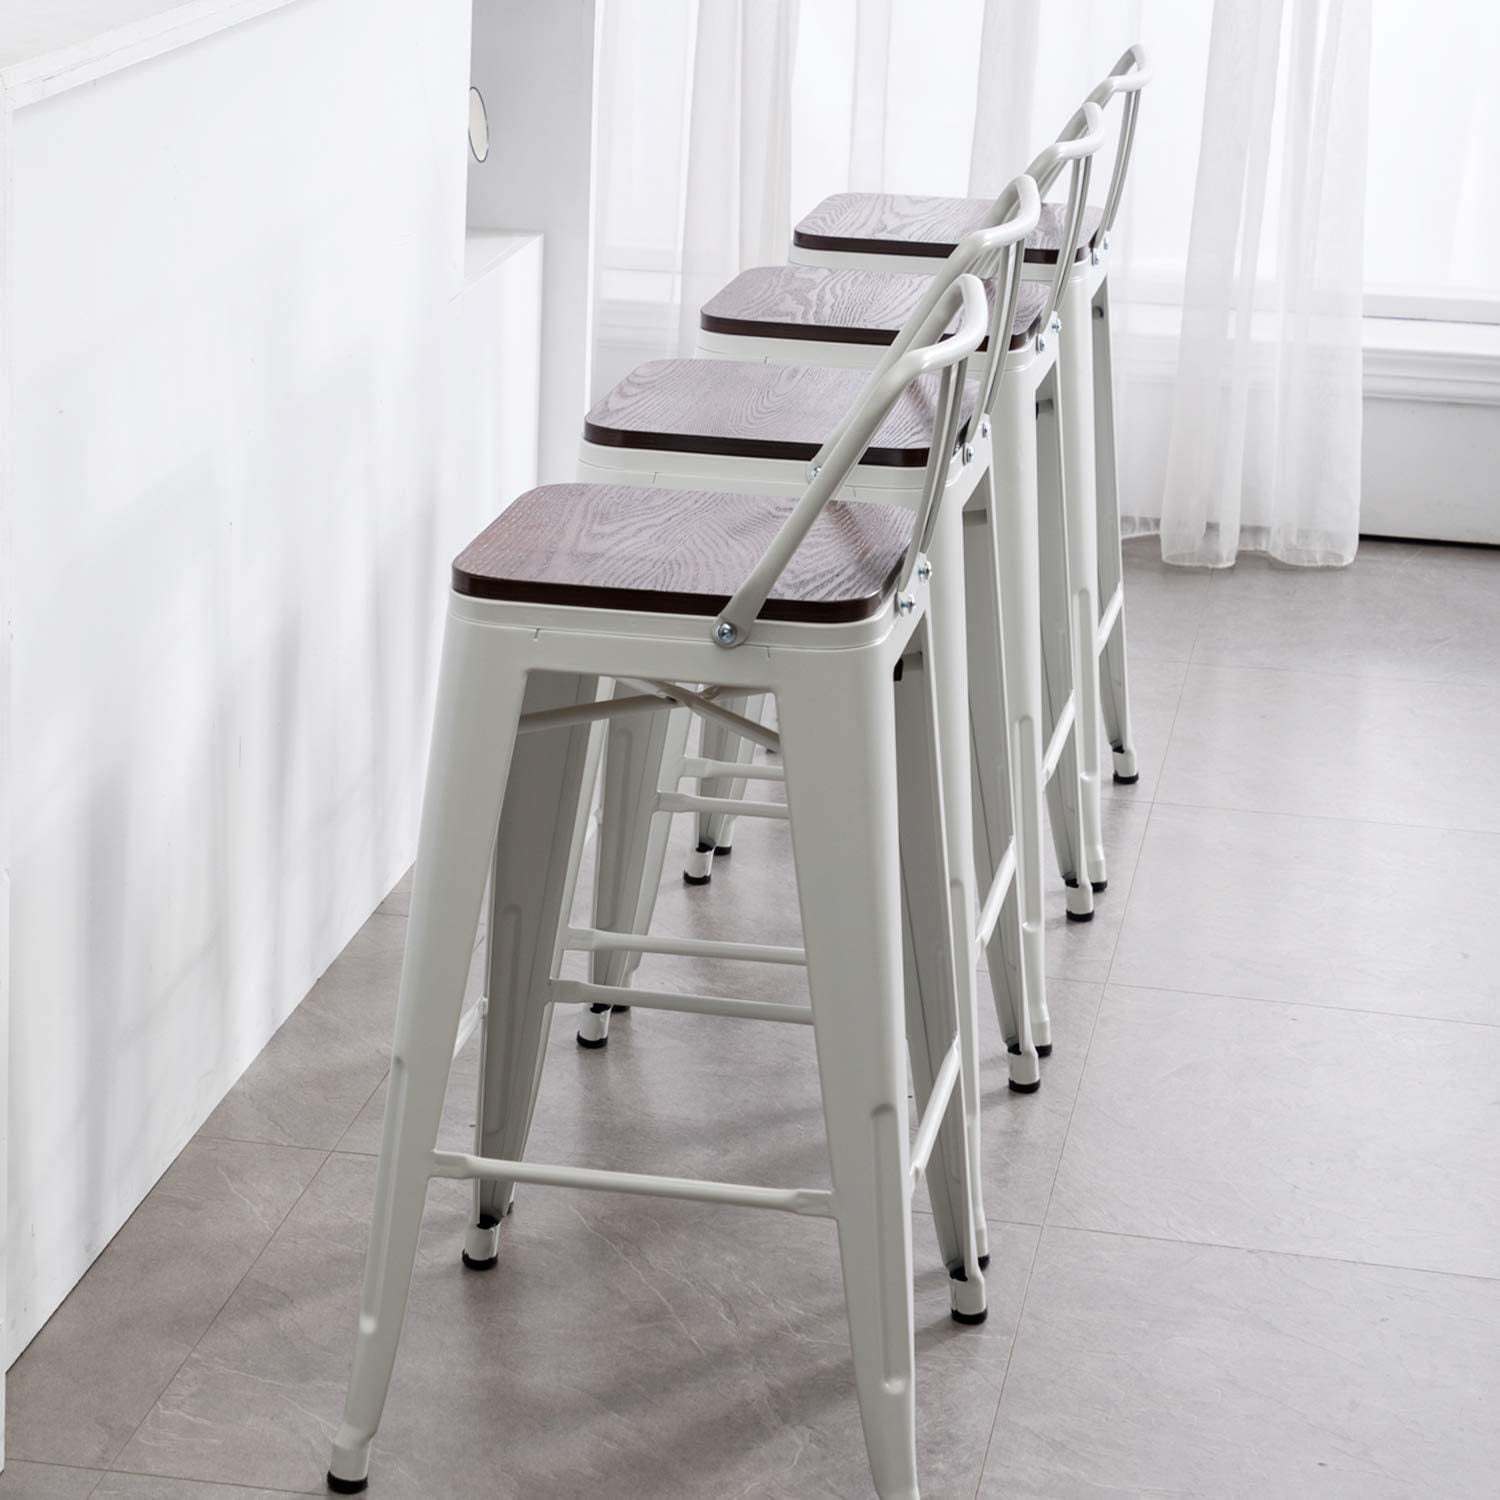 Set of 4 Modern Industrial Metal Bar Stool Counter Height Stools with Stackable Design and Low Back White Wooden Seat (24" Dining Chair)